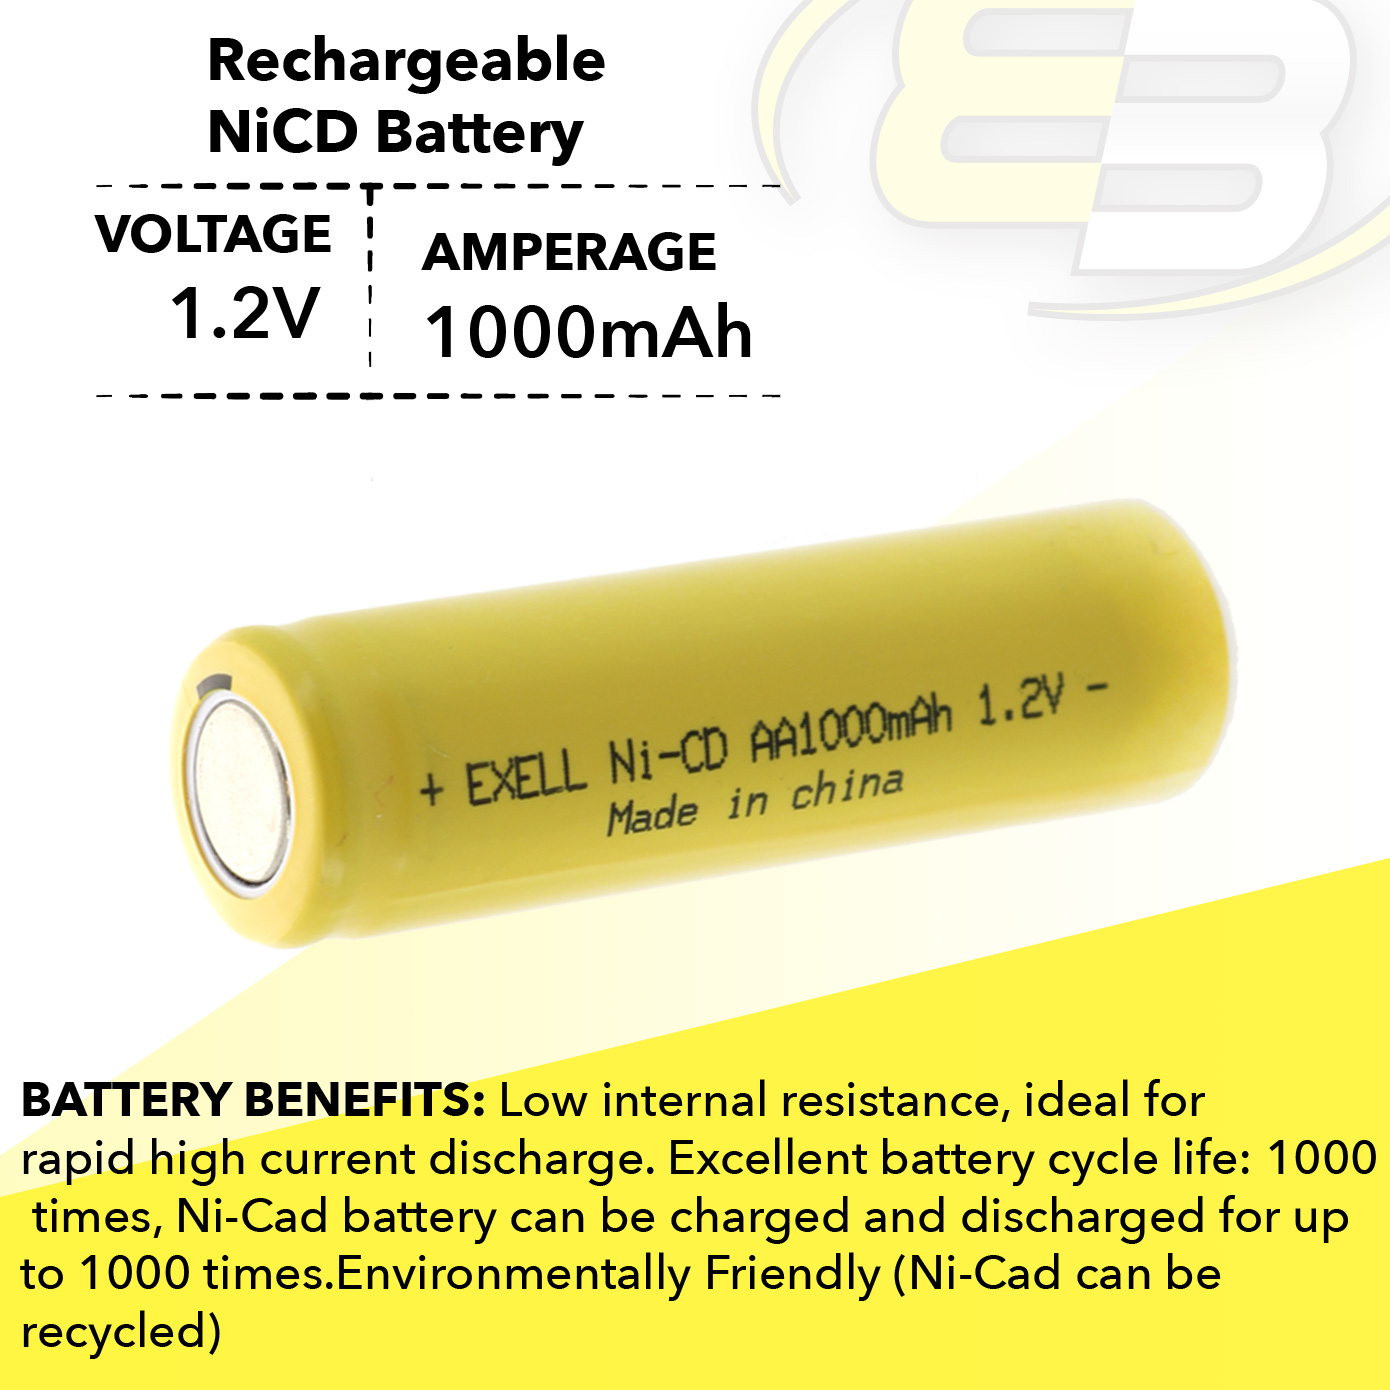 AA 1.2V 1000mAh Flat Top Rechargeable Battery for DIY, Radios, Power Packs - image 4 of 7